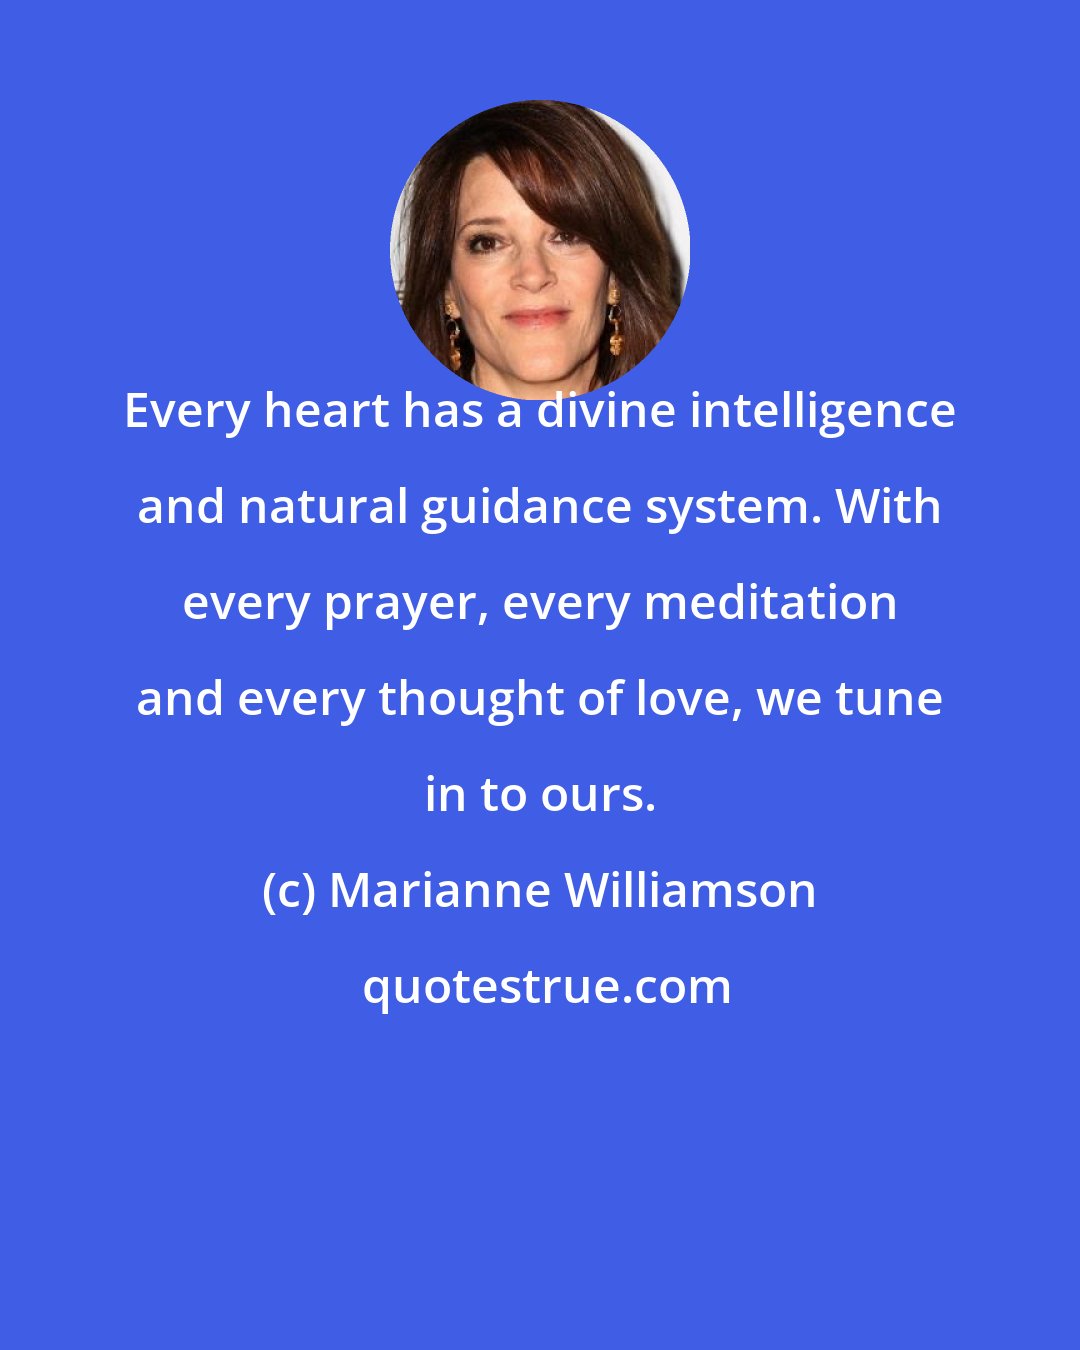 Marianne Williamson: Every heart has a divine intelligence and natural guidance system. With every prayer, every meditation and every thought of love, we tune in to ours.